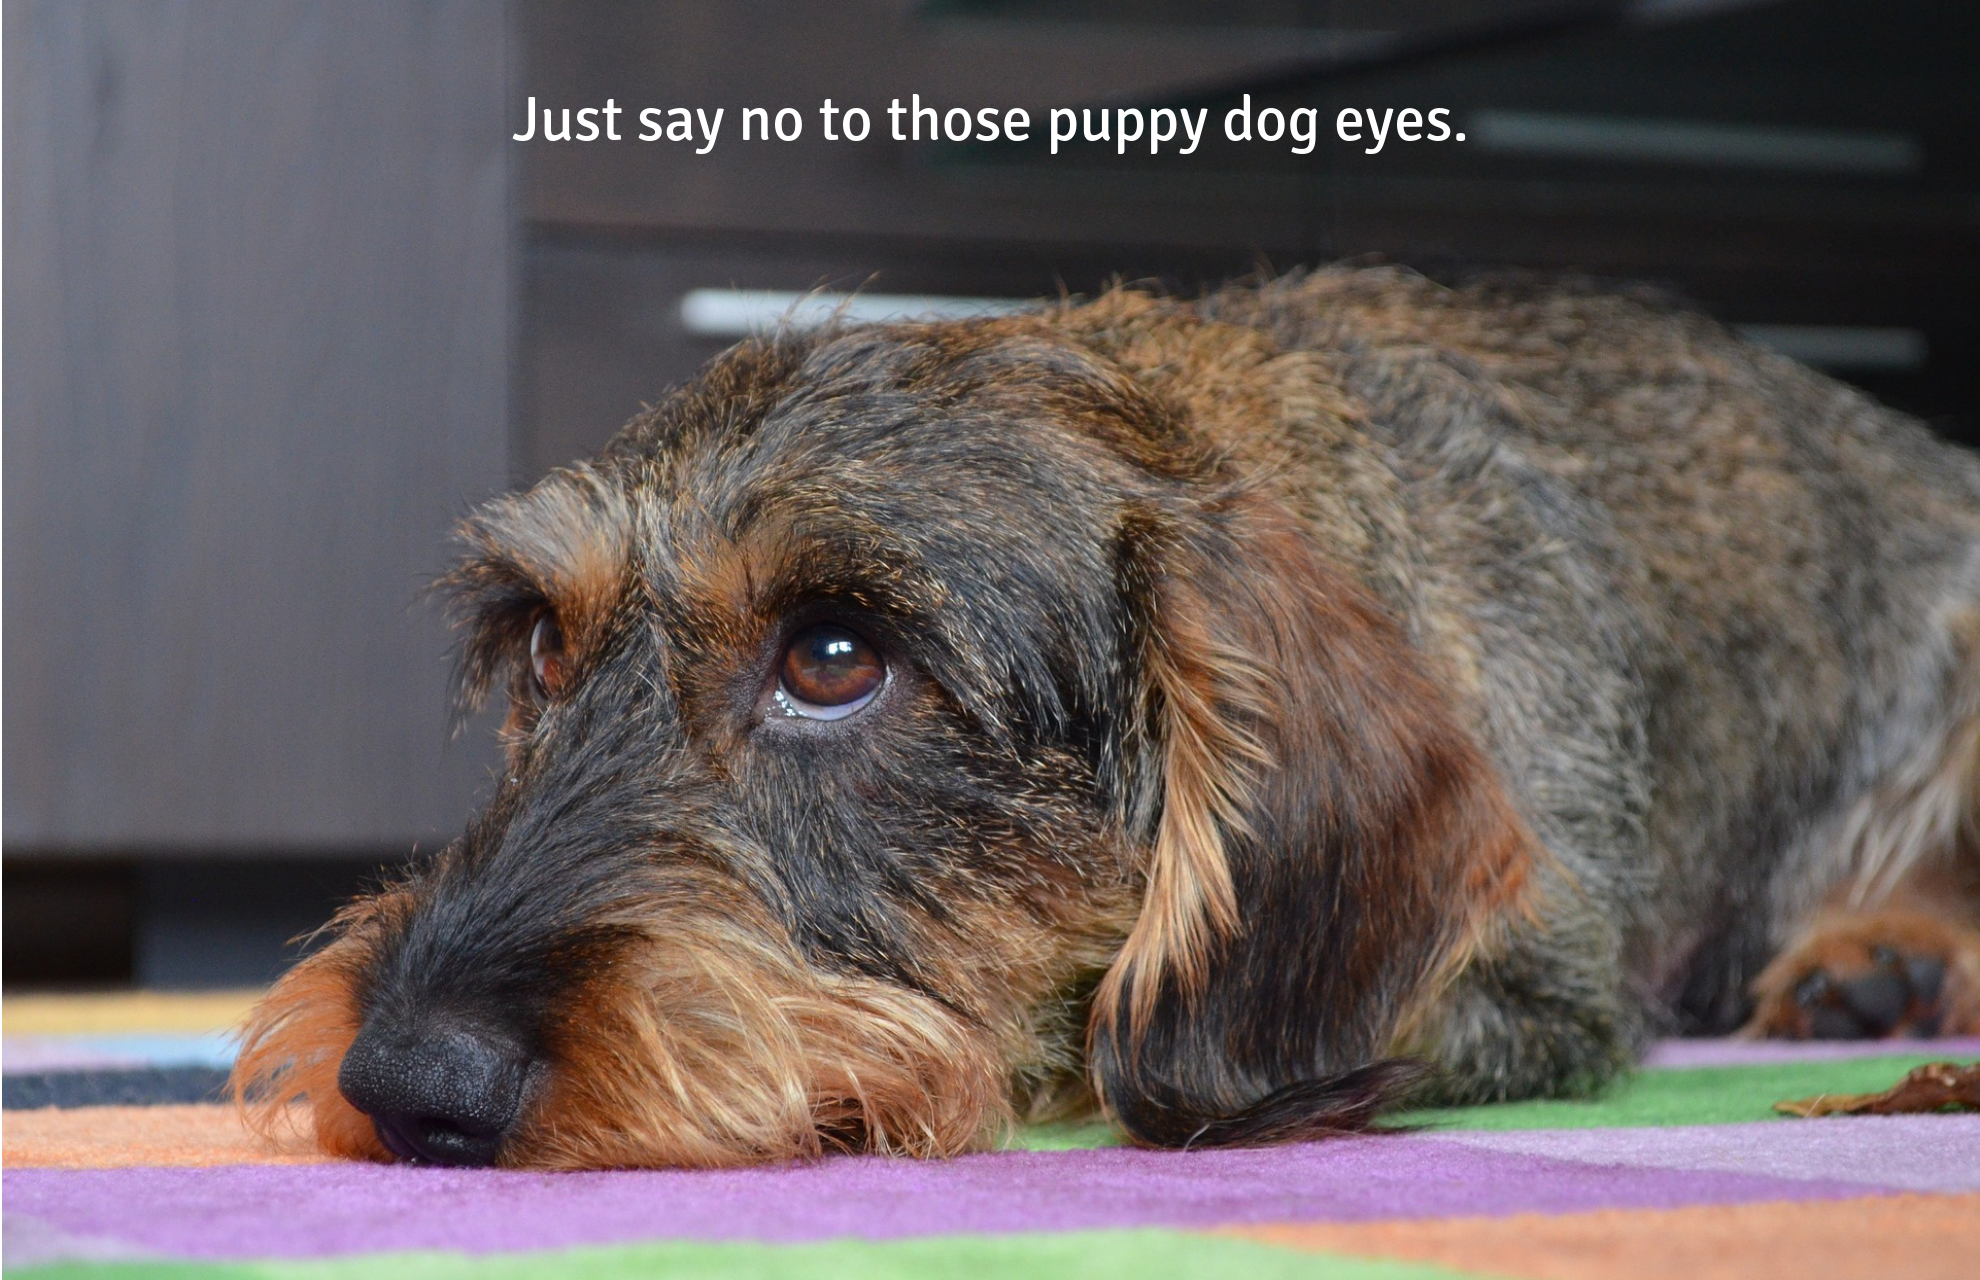 Just say no to those puppy dog eyes.